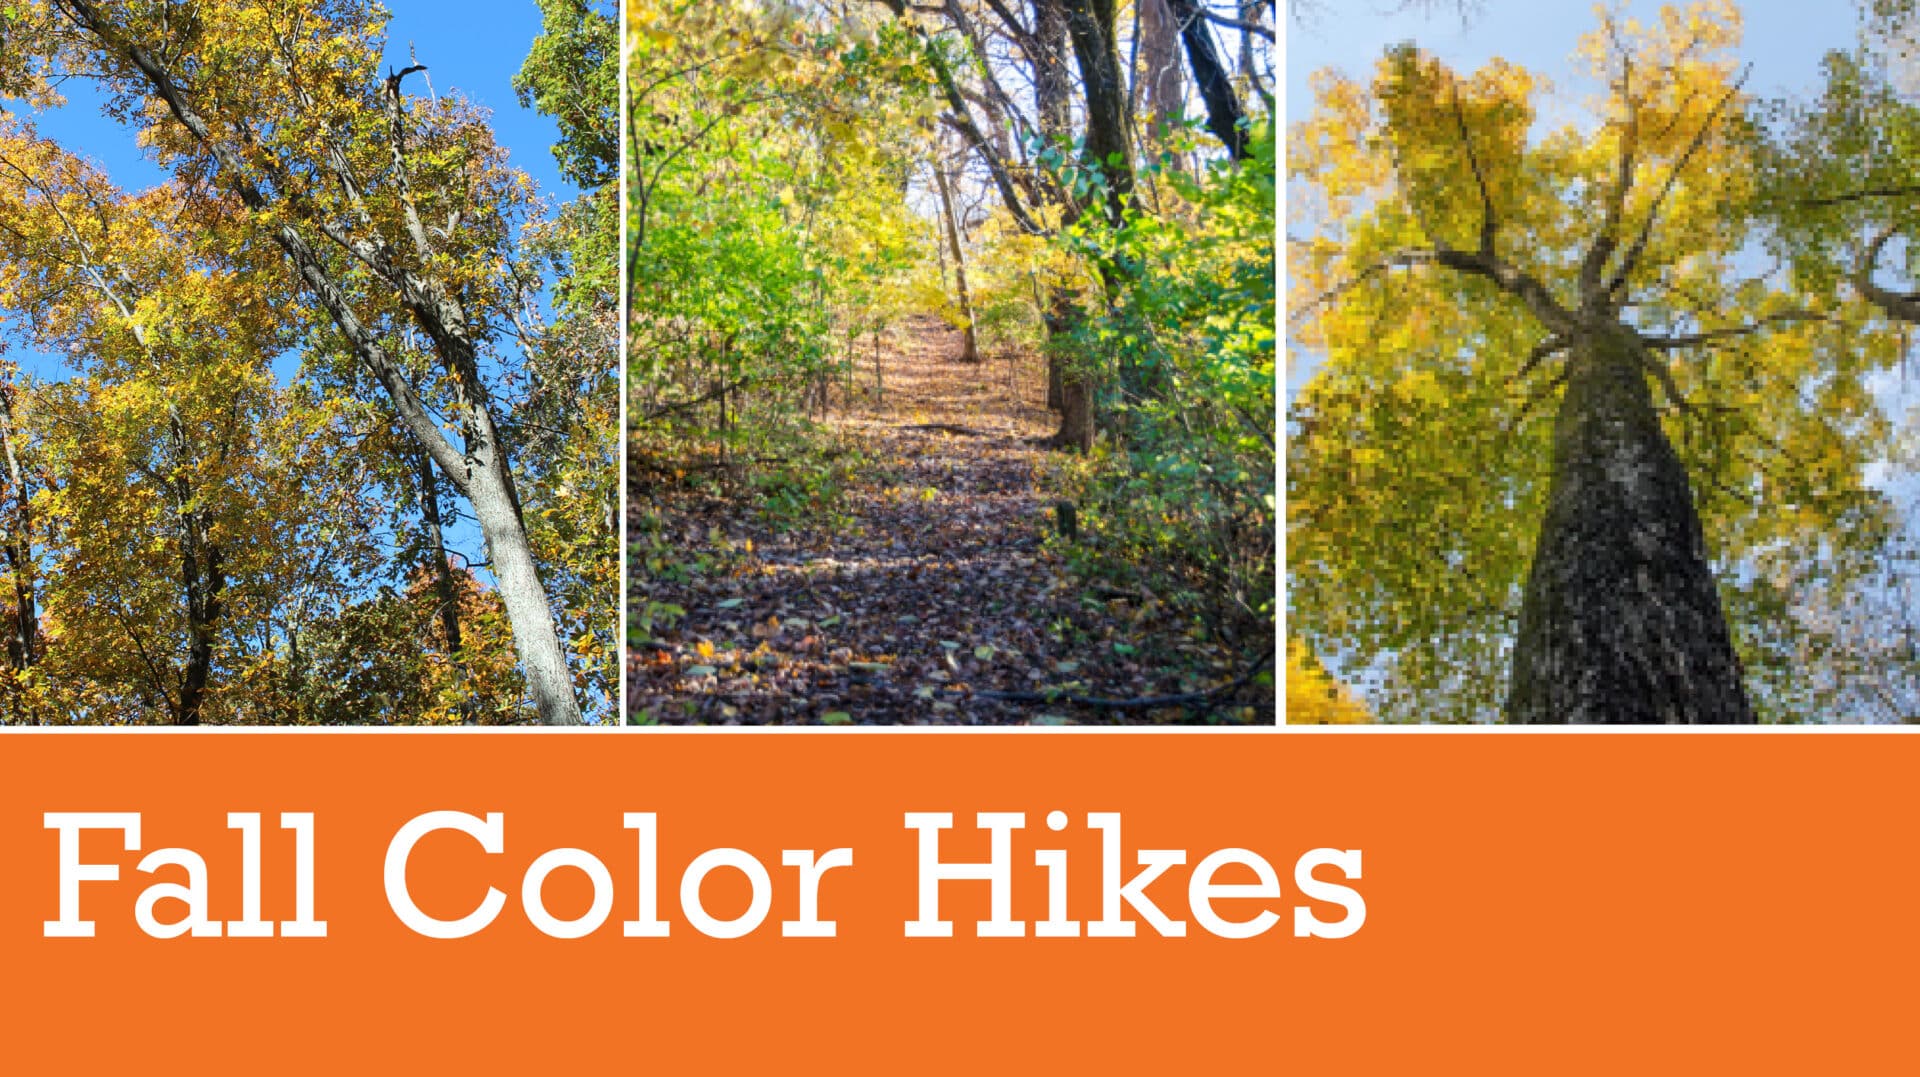 Fall Color Hikes in Brentwood, TN at Owl's Hill Nature Sanctuary.